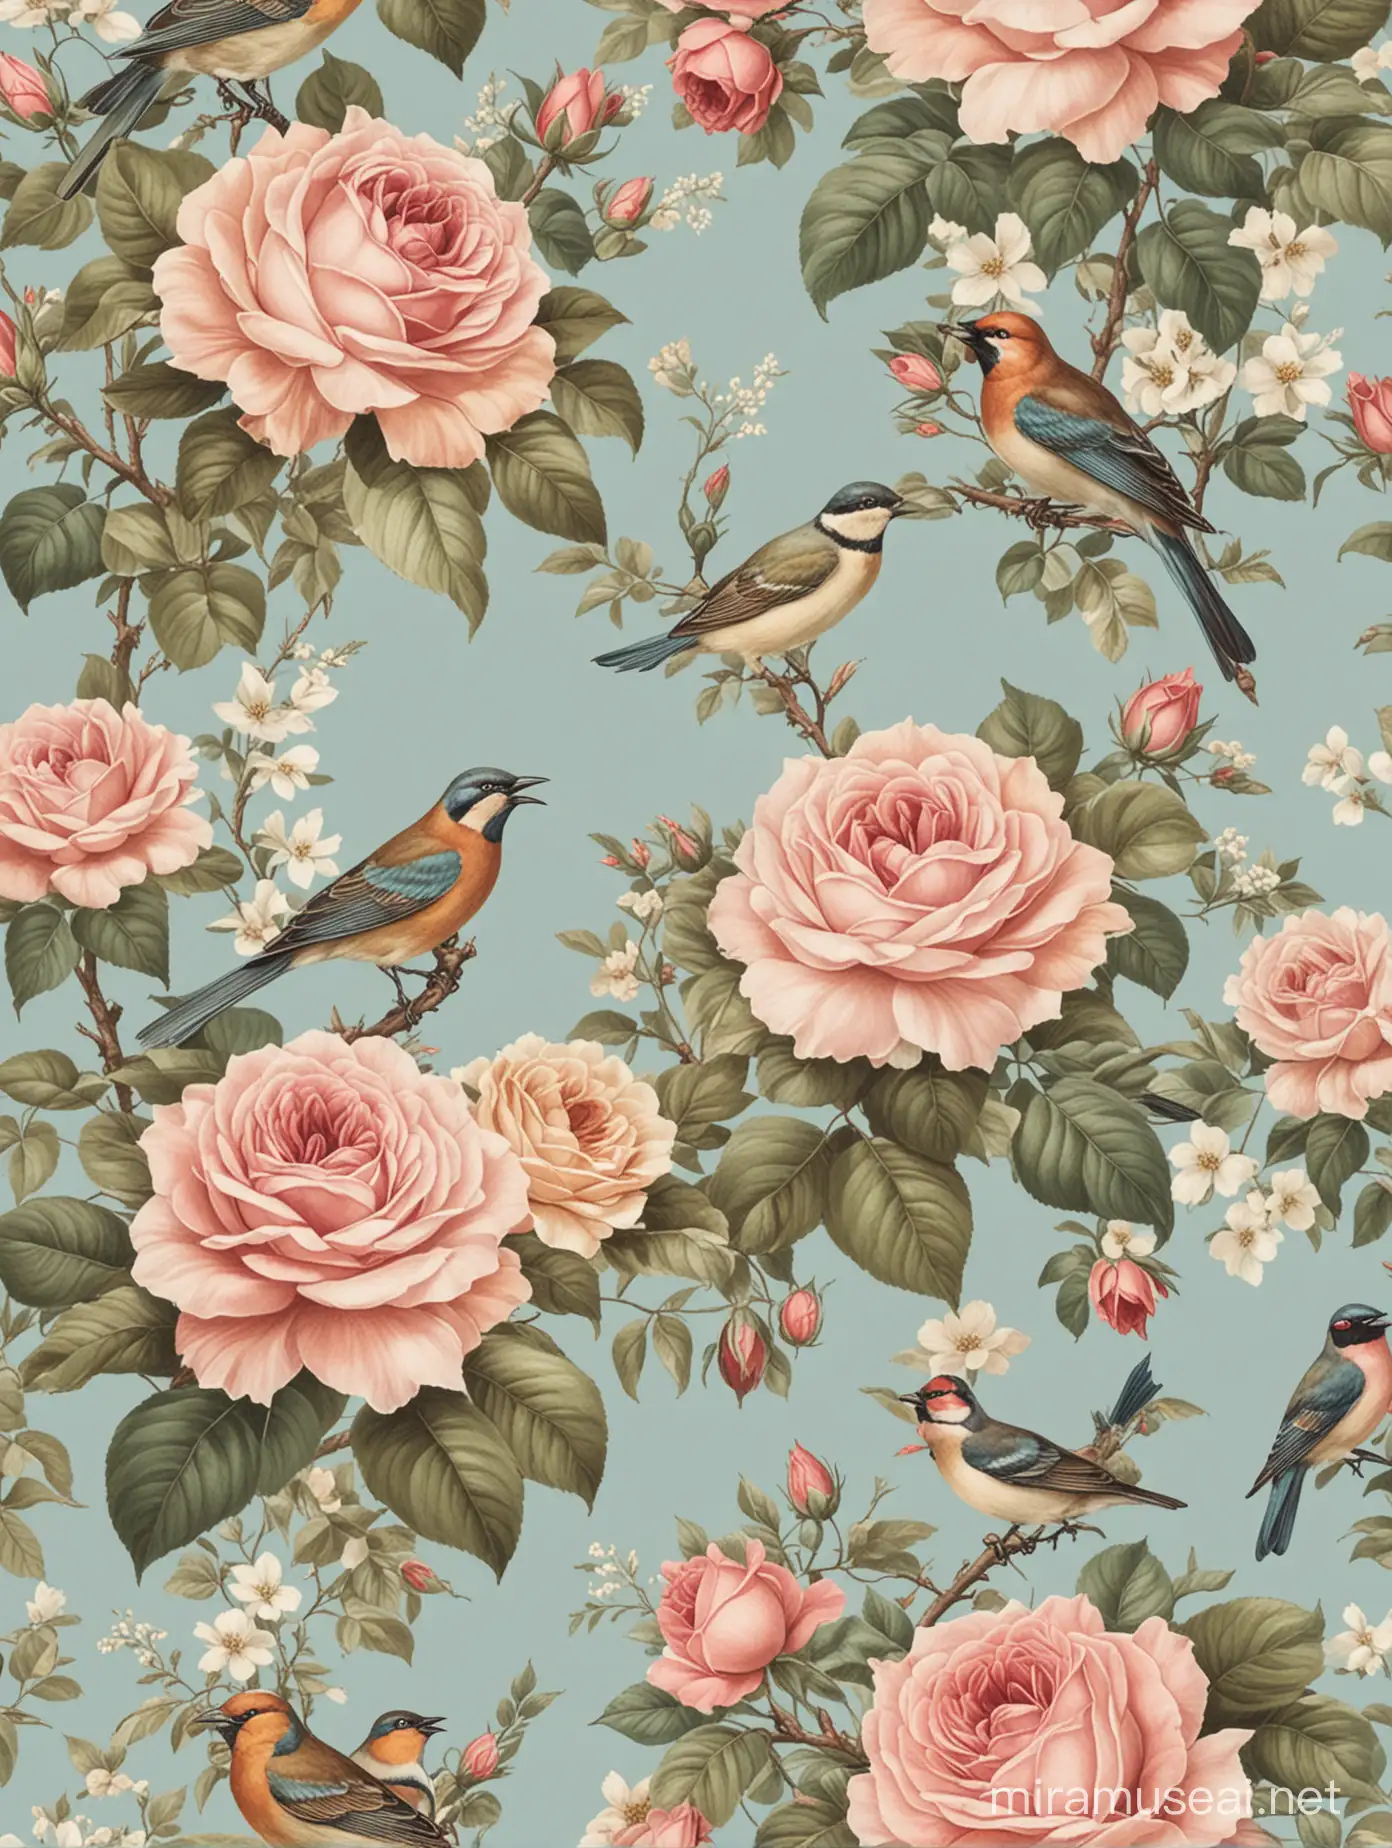 Create an image of vintage style wallpaper with roses and birds
